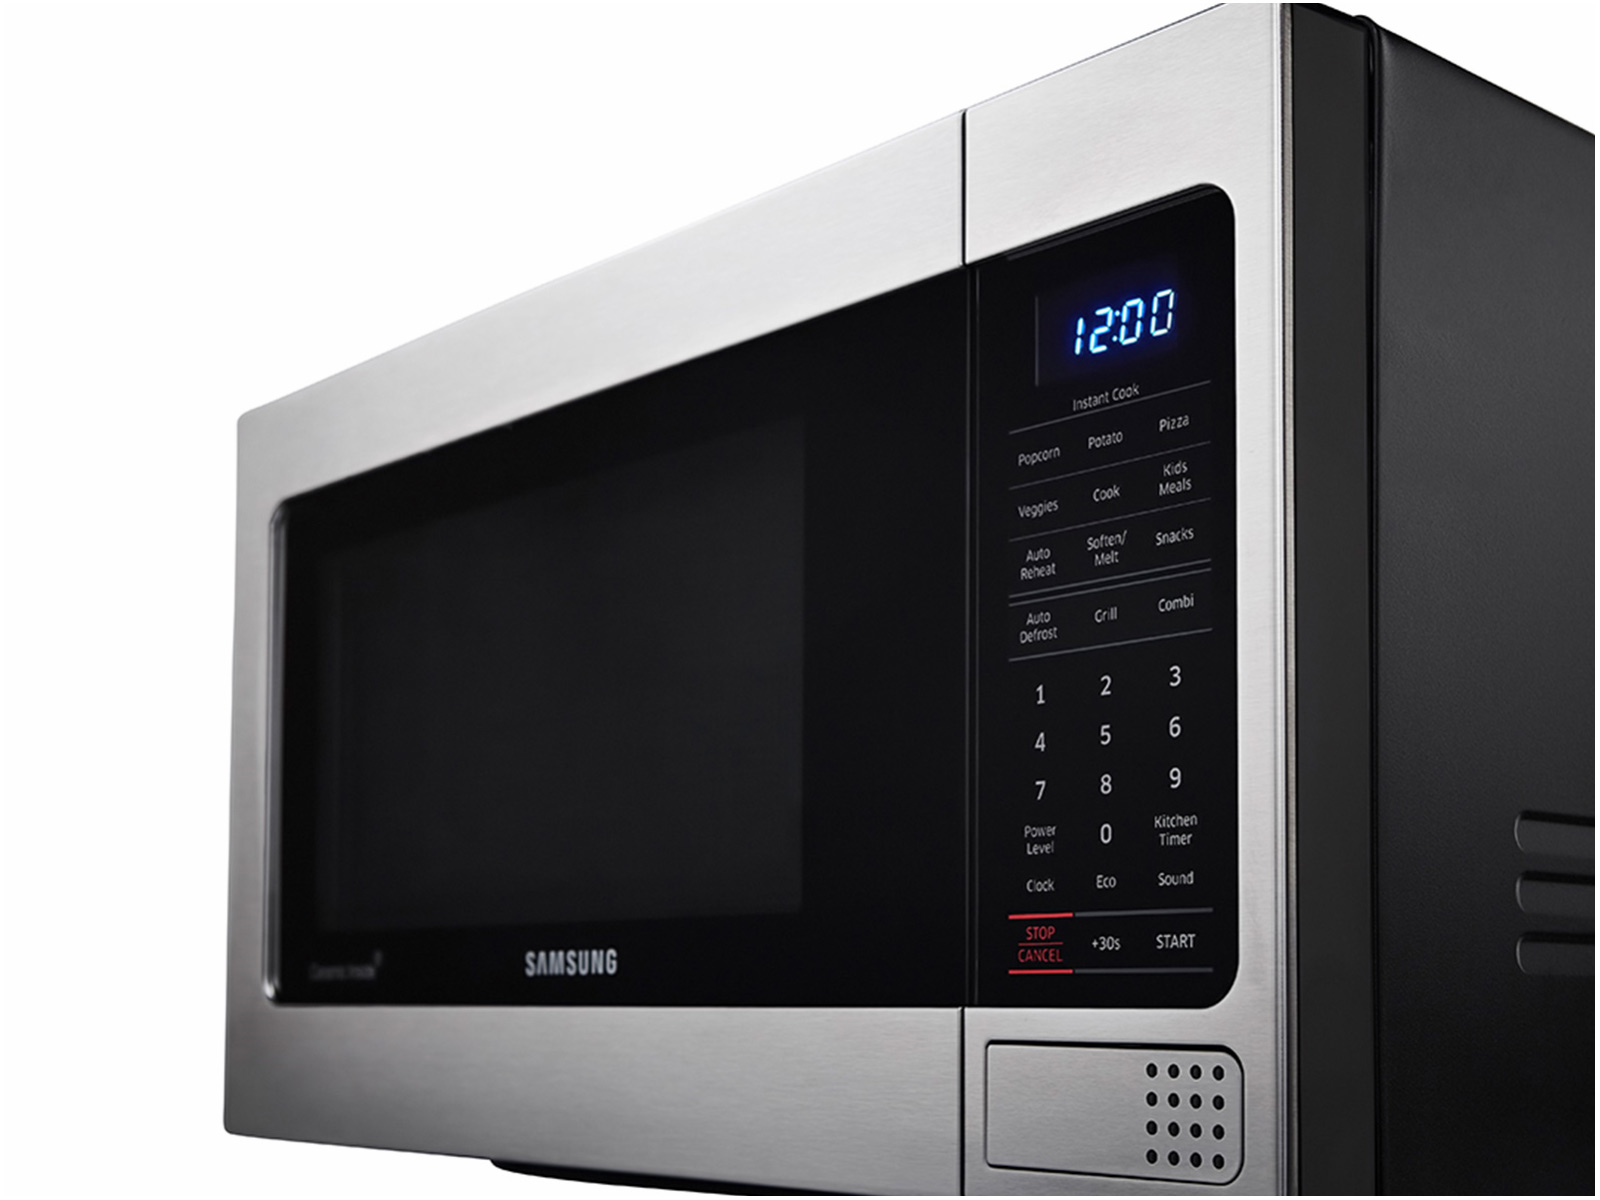 https://image-us.samsung.com/SamsungUS/home/home-appliances/microwaves/countertop/pdp/mg11h2020ct-aa/gallery/04_Microwave_Countertop_MG11H2020CT_Dynamic_R-Perspective_Closed_Silver.jpg?$product-details-jpg$